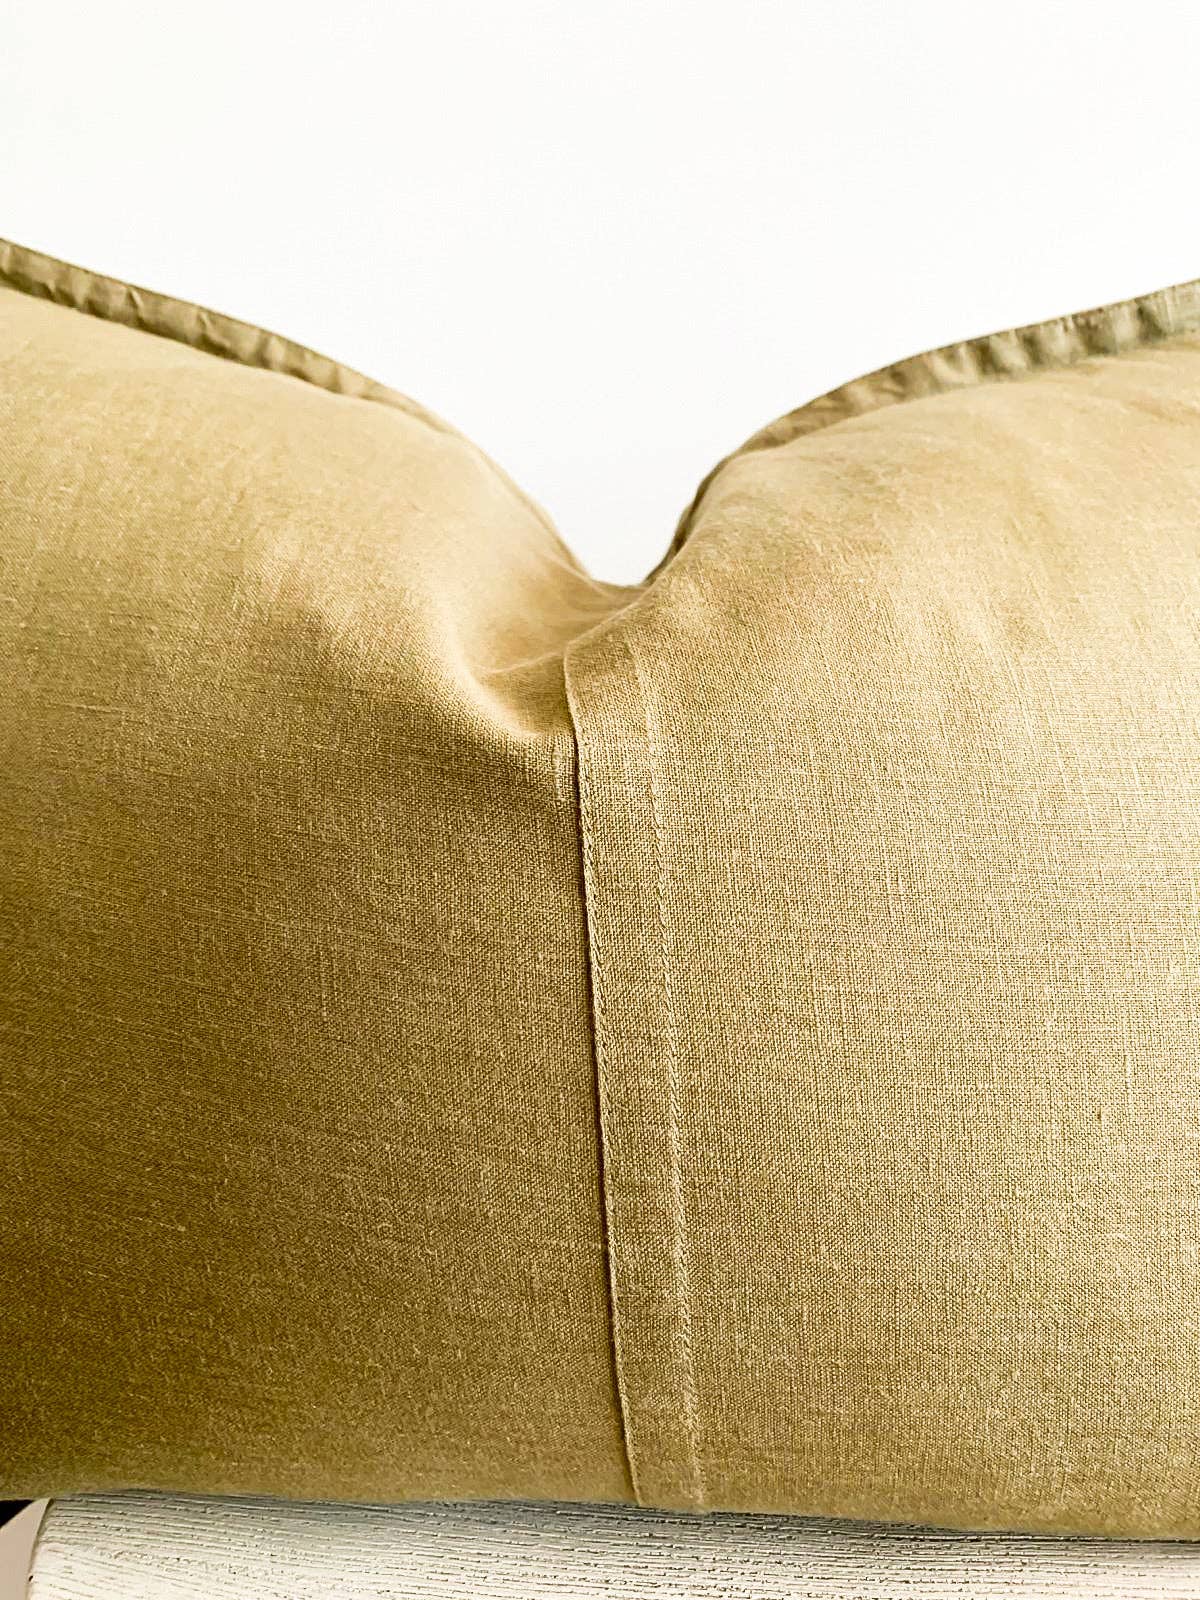 Pure French Linen Lumbar Cushion Cover - Olive